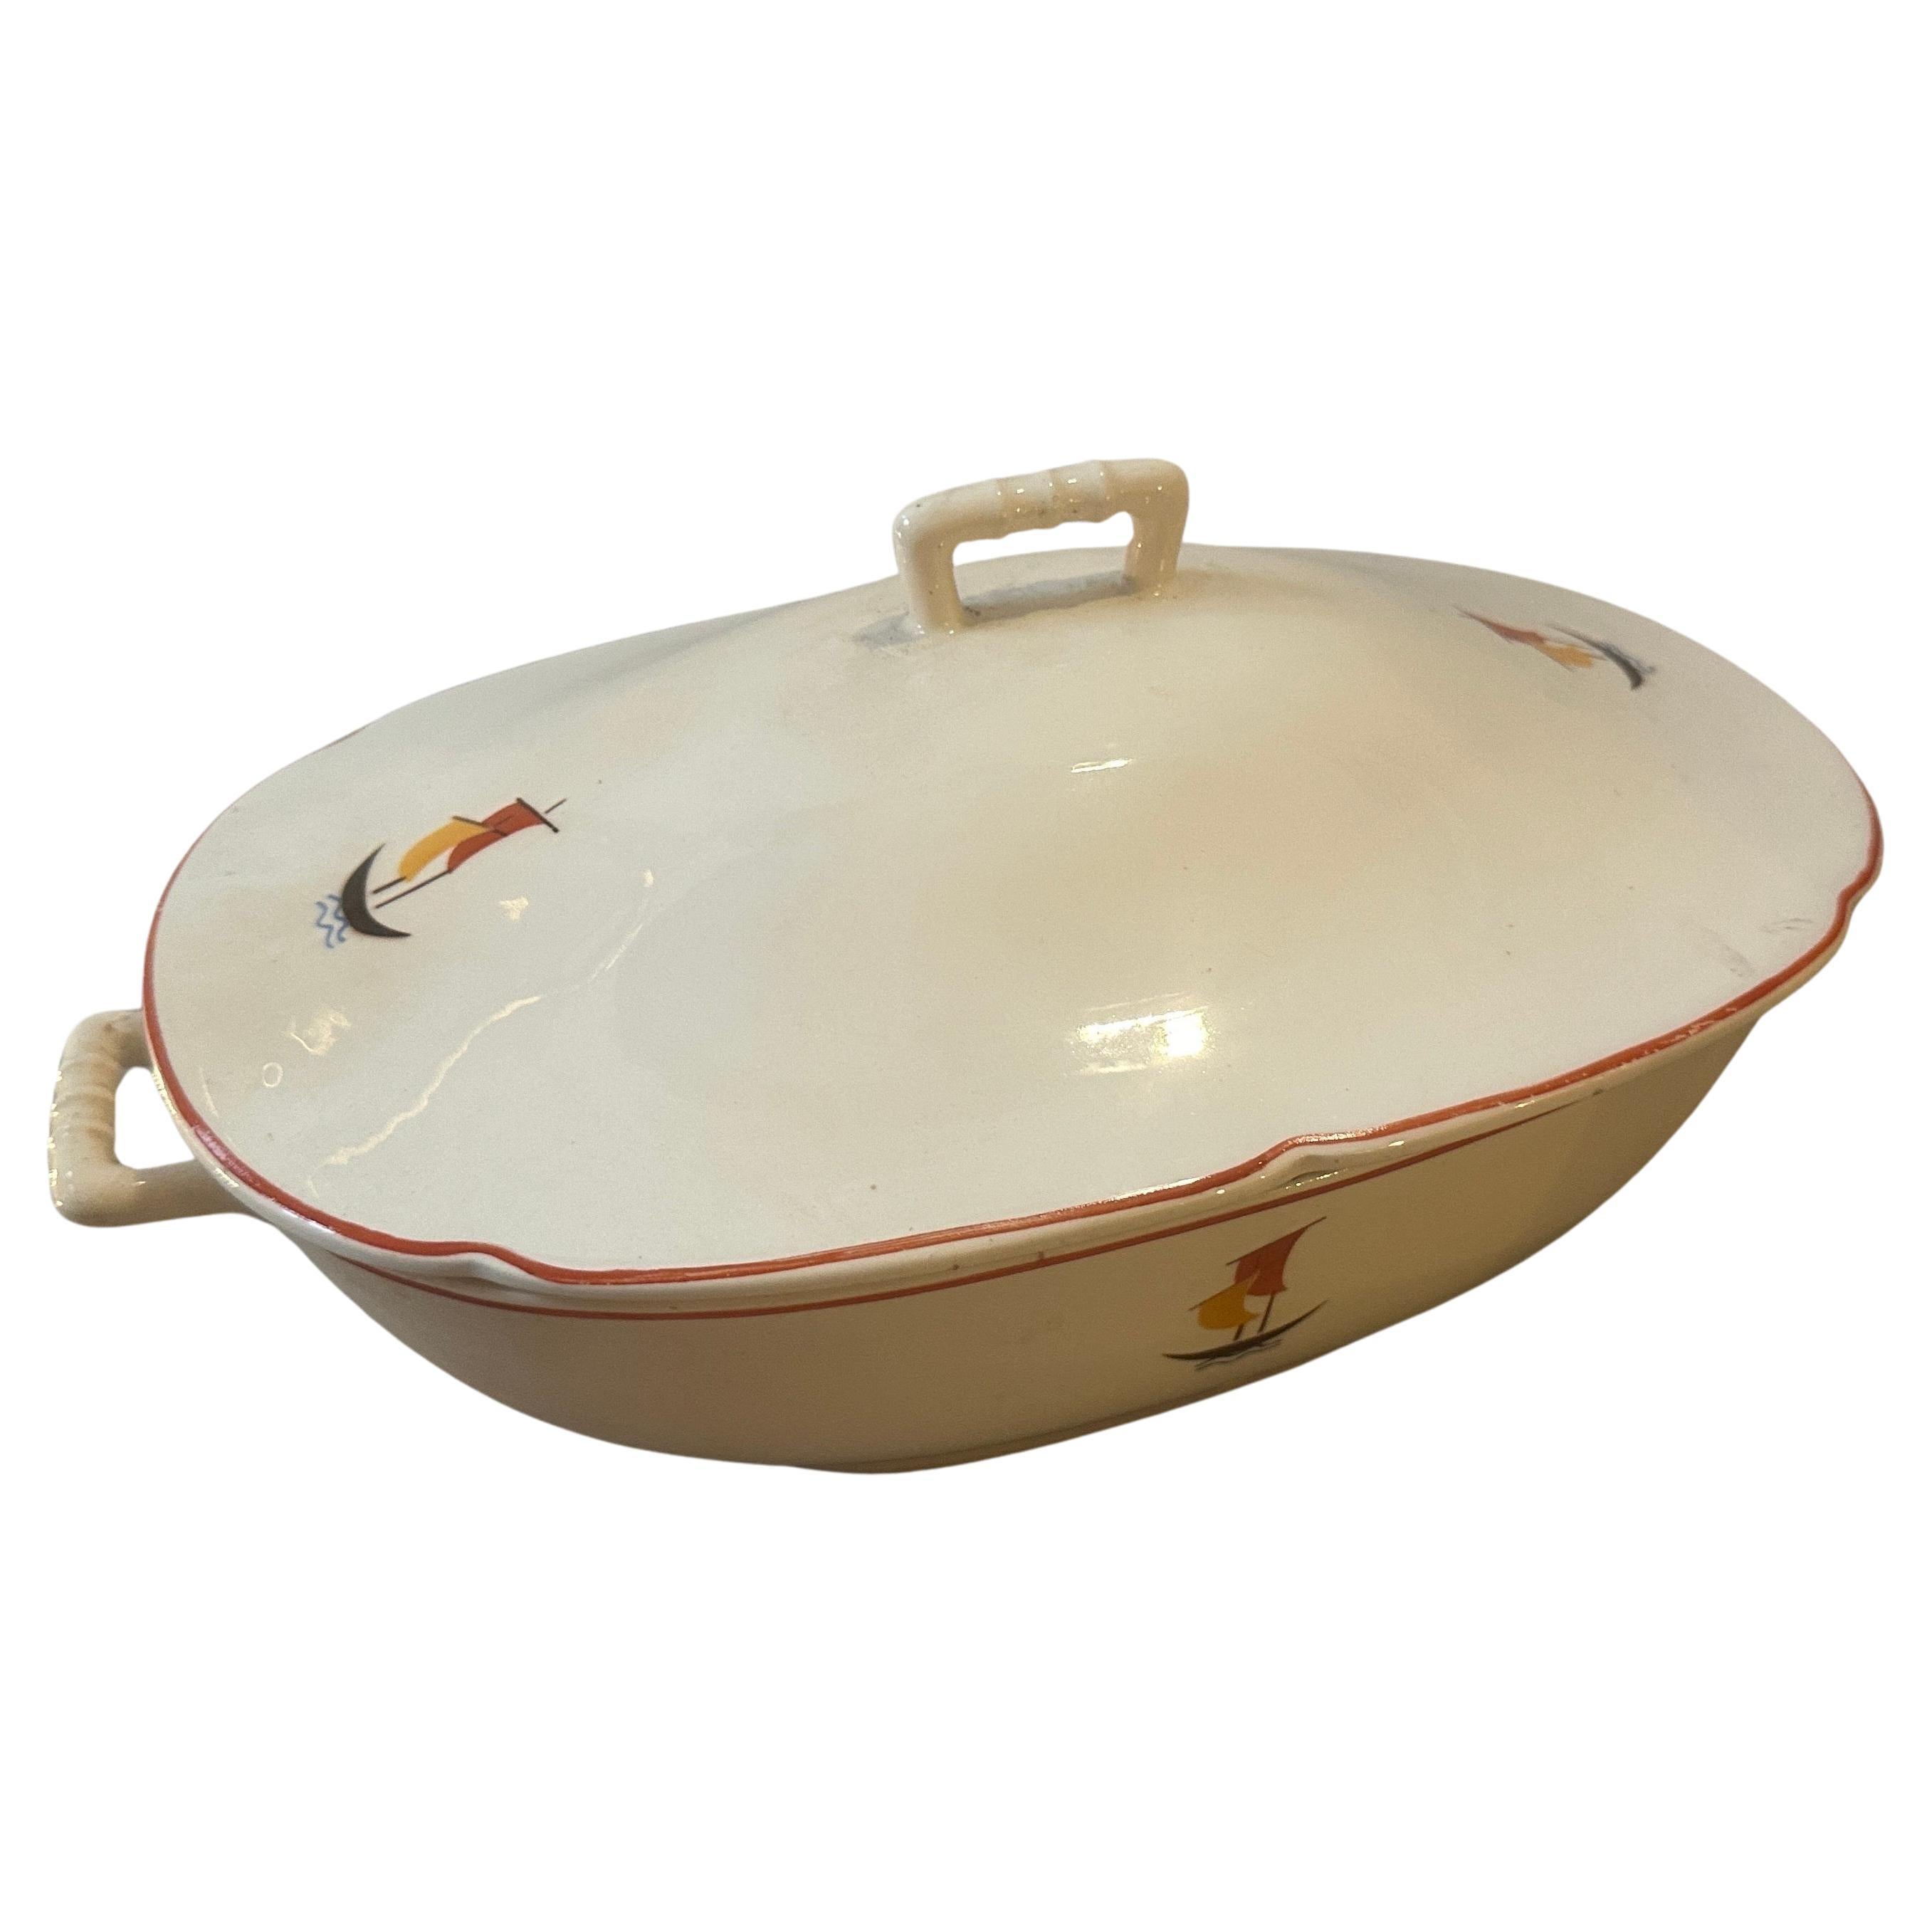 A ceramic soup tureen manufactured by S. C. Richard in Italy in the 1935, decor representing a sail boat has been designed by Gio Ponti. Soup tureen was part of a dinner service, it's marked on the bottom and in perfect conditions. Gio Ponti was an